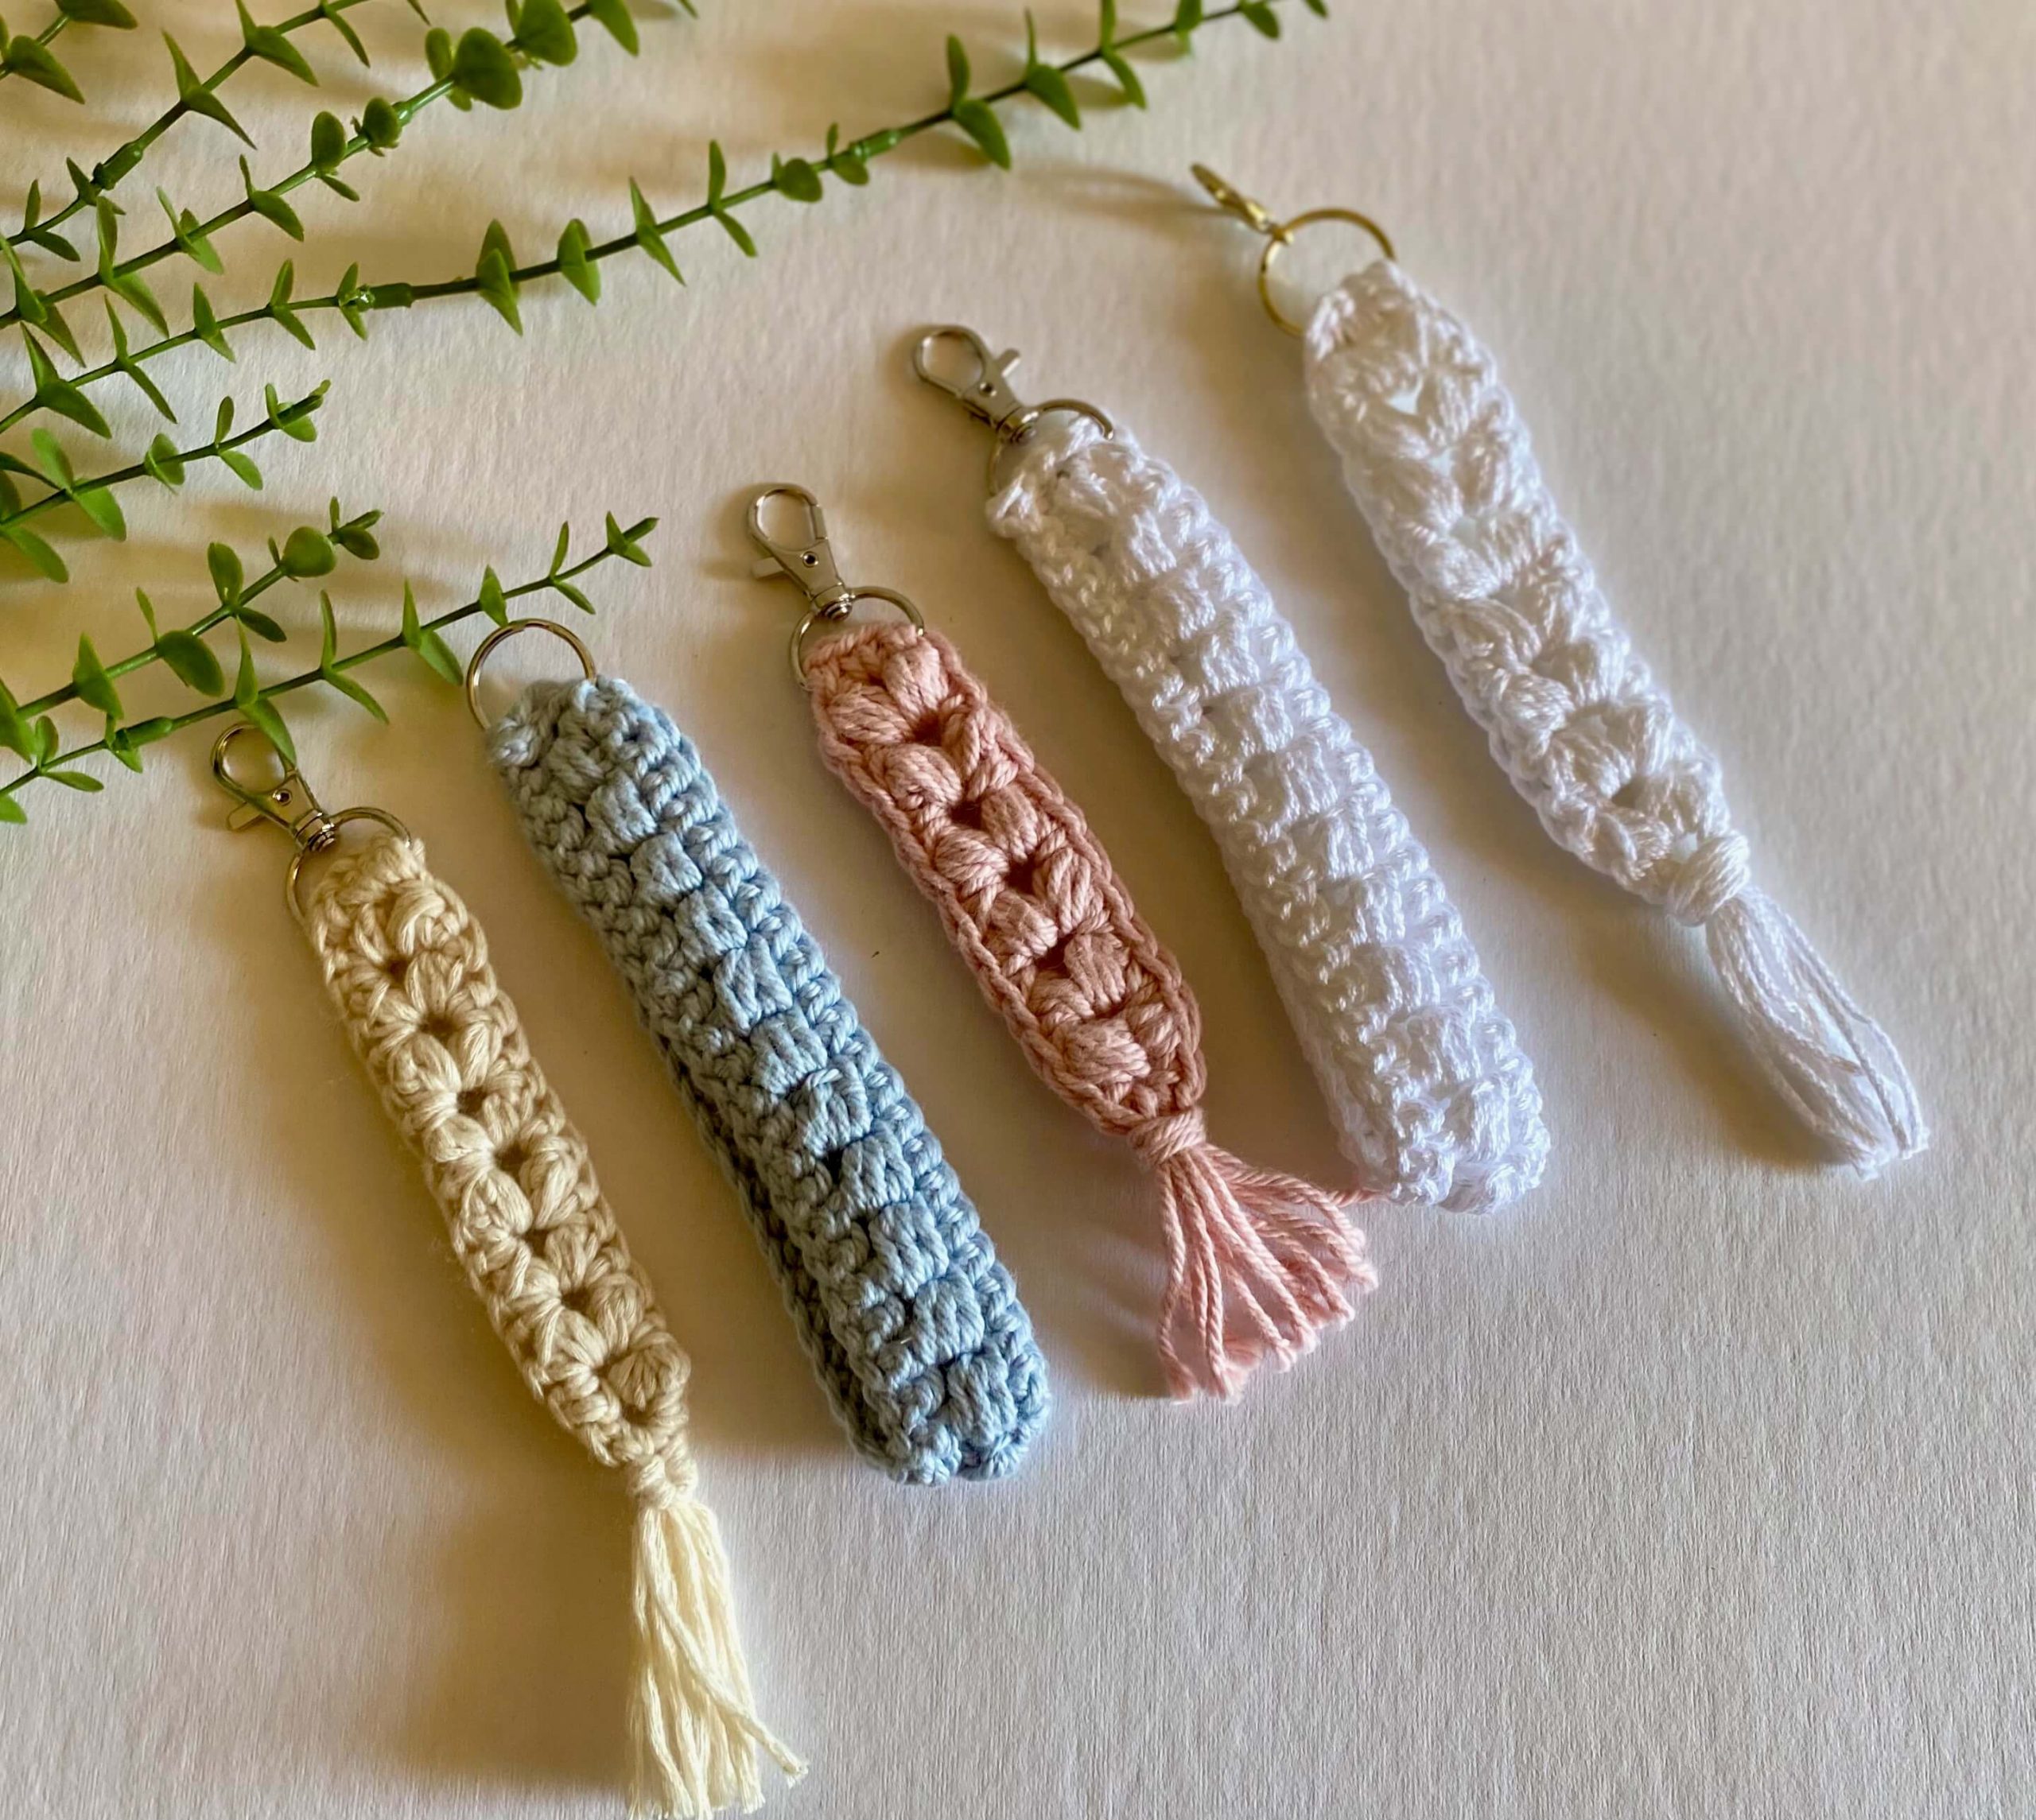 Crochet Keychains & Wristlets - Love to stay home